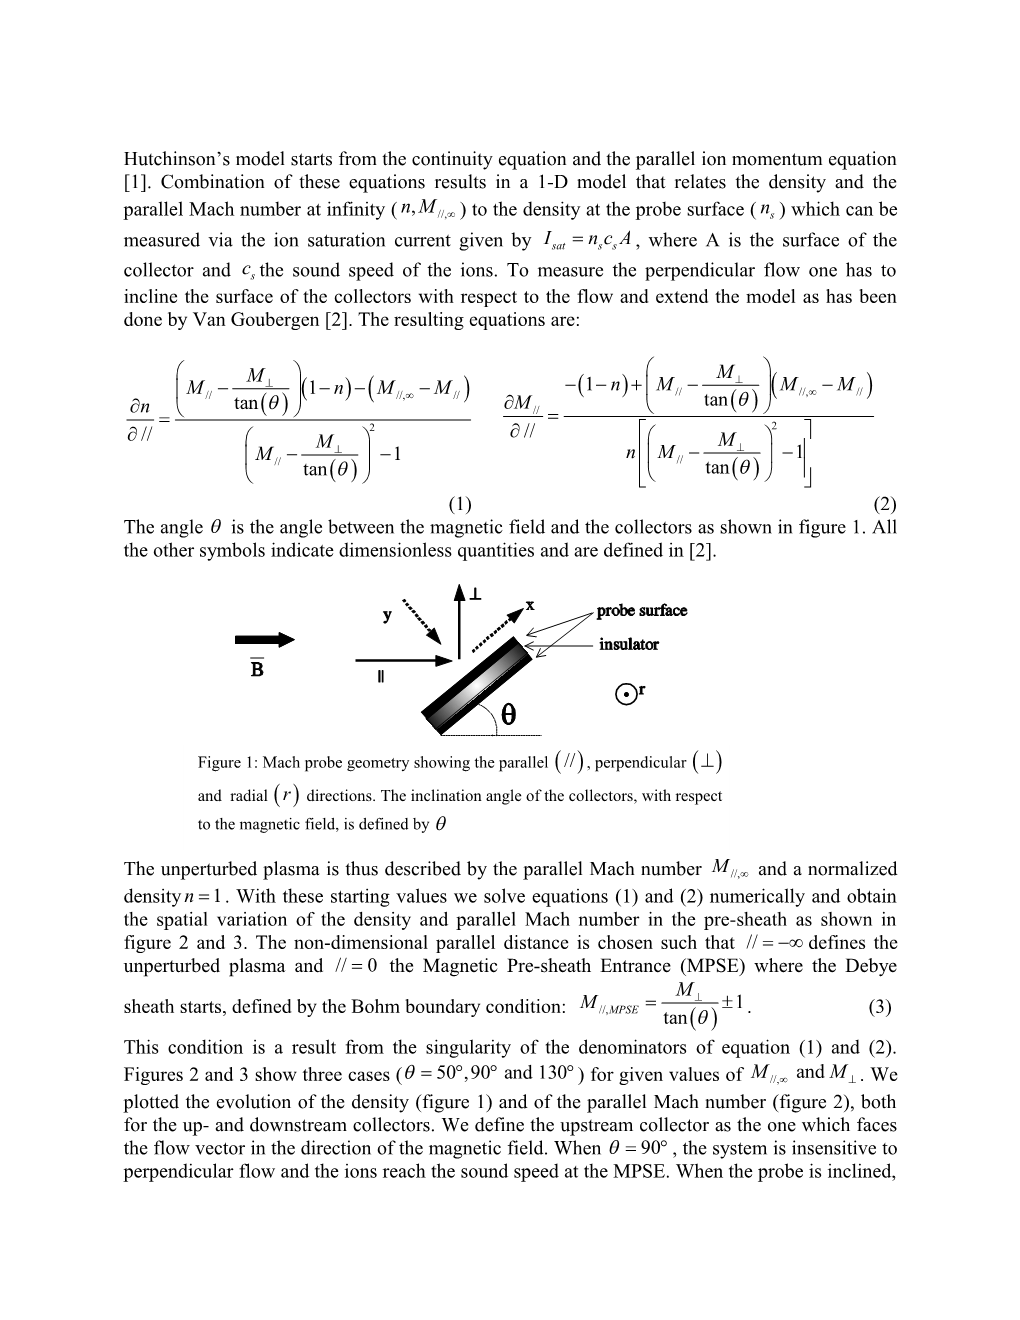 Study of the Accuracy of Mach Probes to Measure the Parallel and Perpendicular Flow In